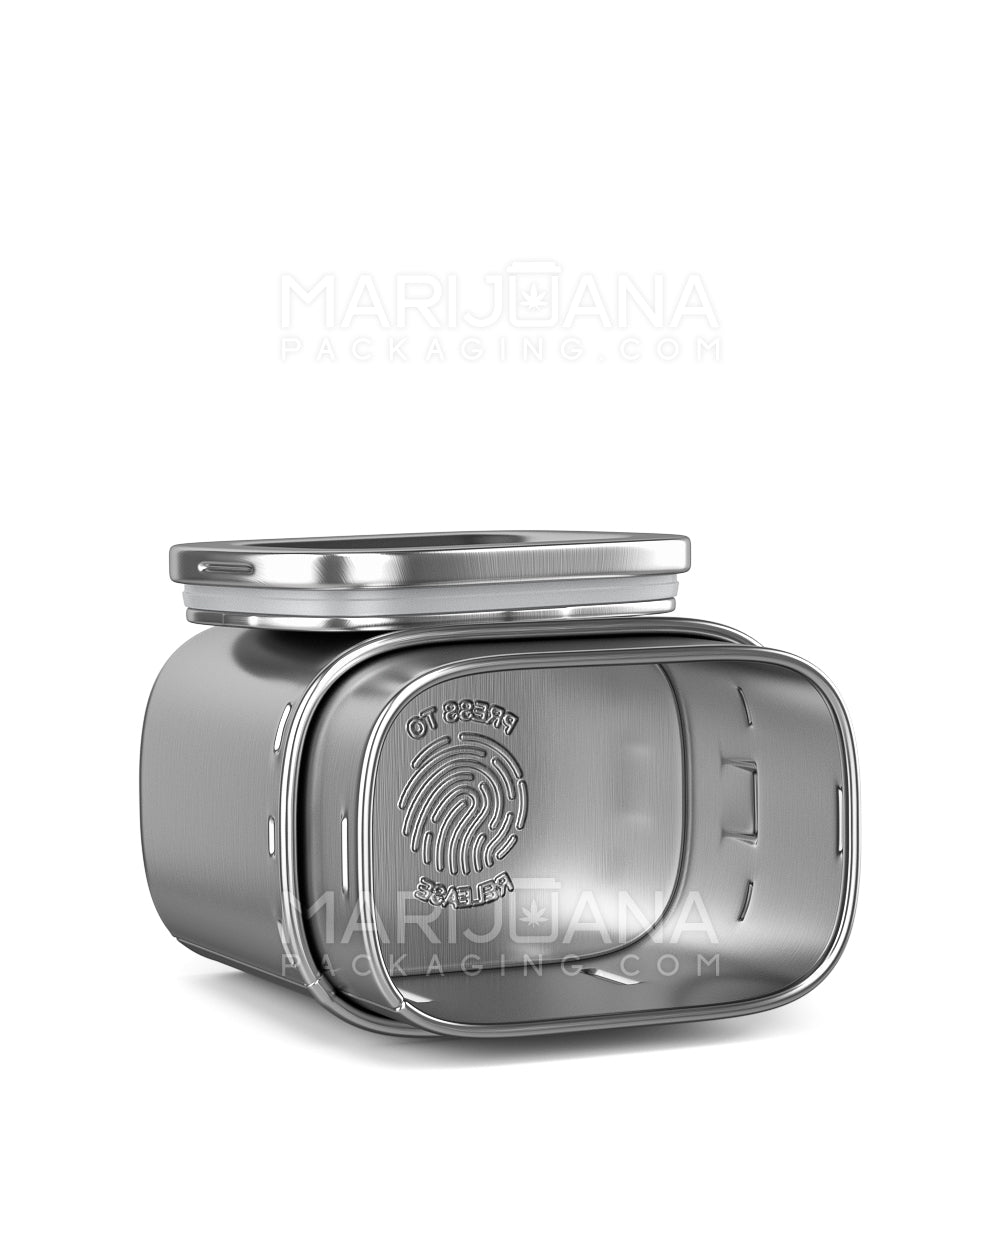 Child Resistant & Sustainable | 100% Recyclable PushTin Medium Container | 2oz - Silver Tin - 200 Count - 11